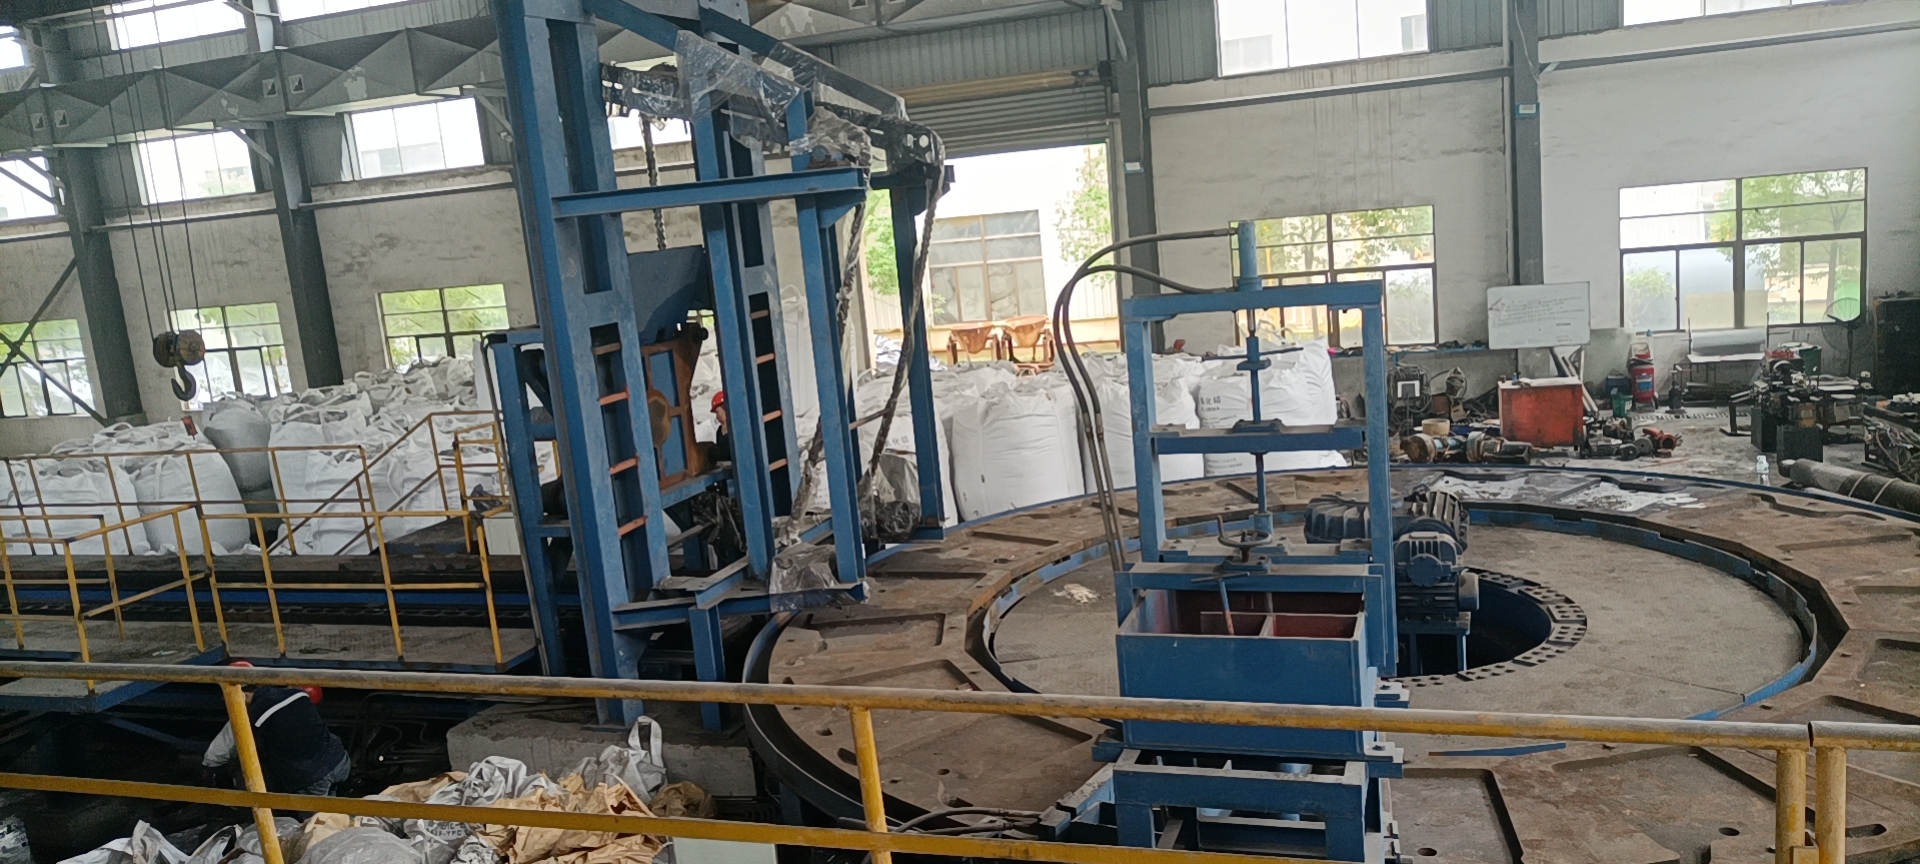 lead battery scrap recycle electrolysis system machine line disc round crude lead anode plate casting machine